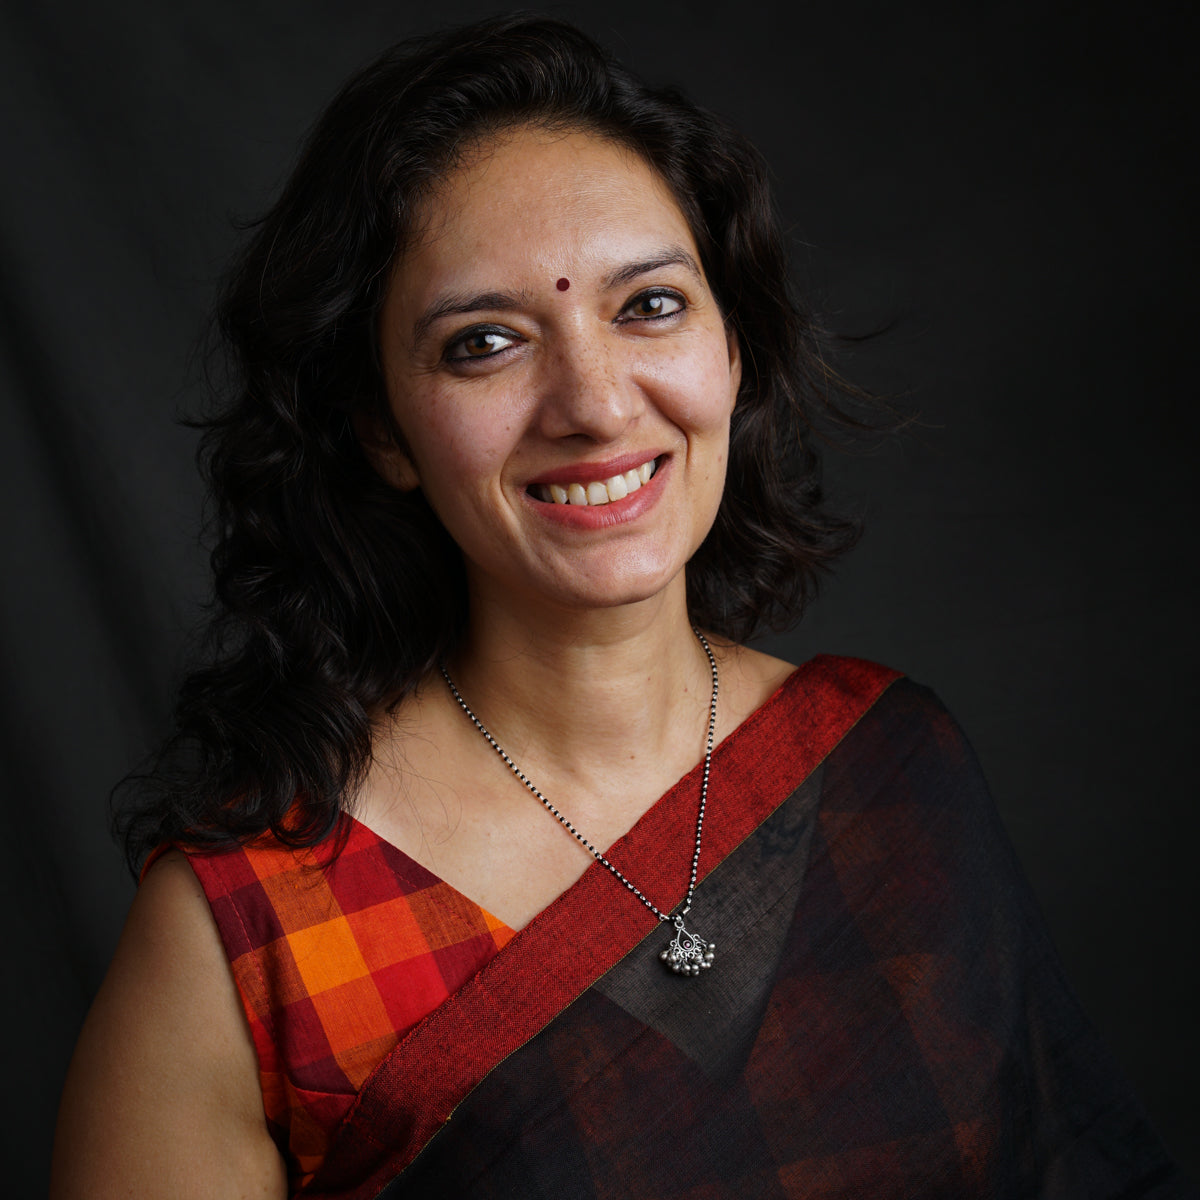 a woman wearing a red and black sari